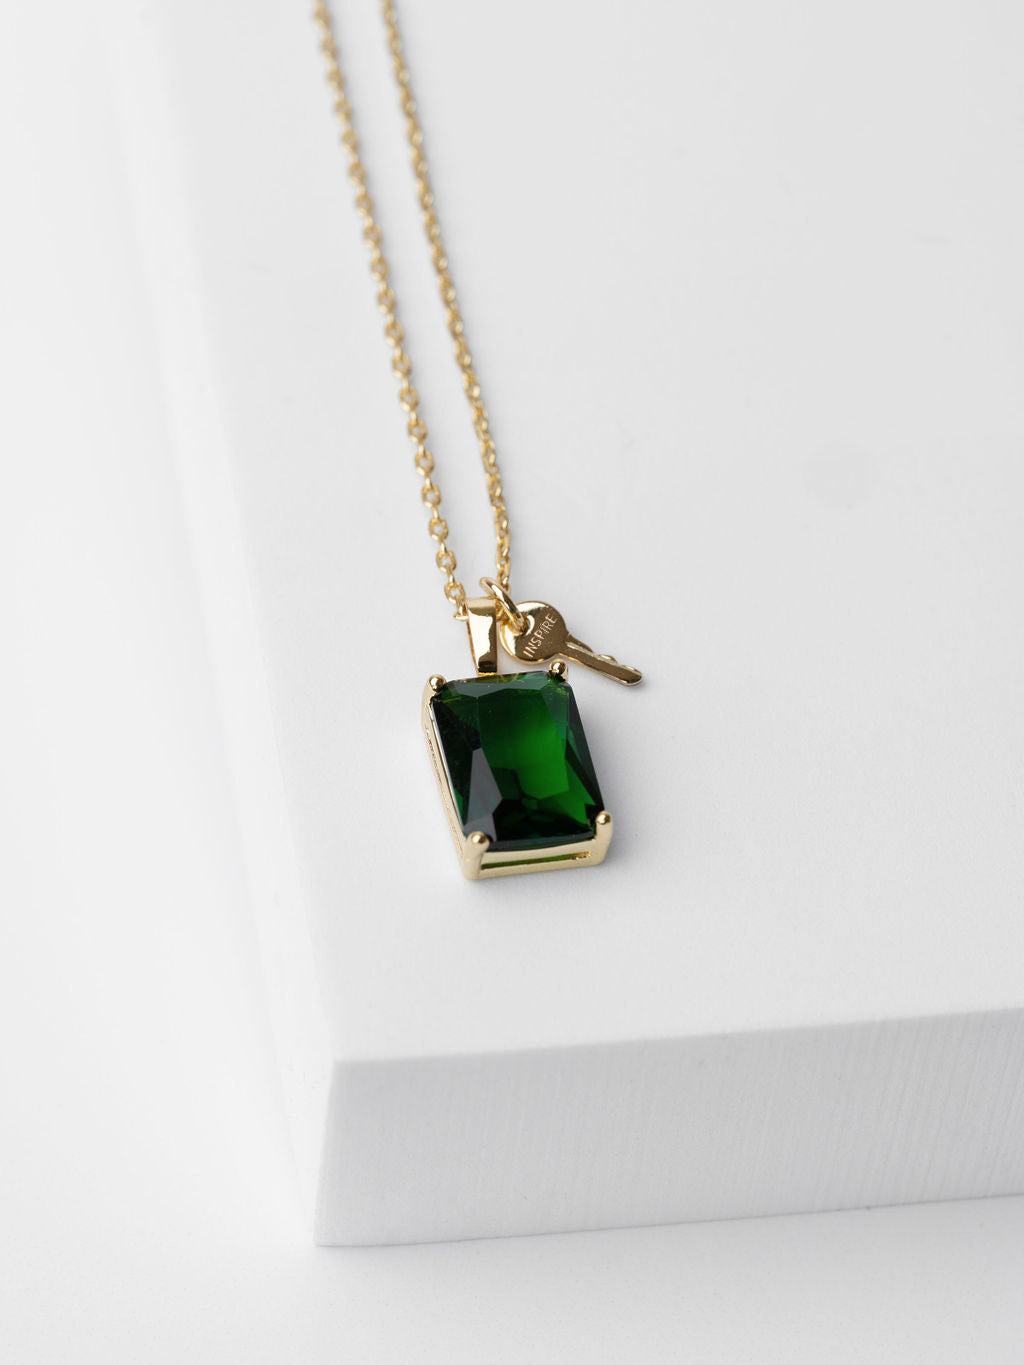 Emerald Cut Gemstone and Mini Key Necklace Necklaces The Giving Keys INSPIRE / Emerald 